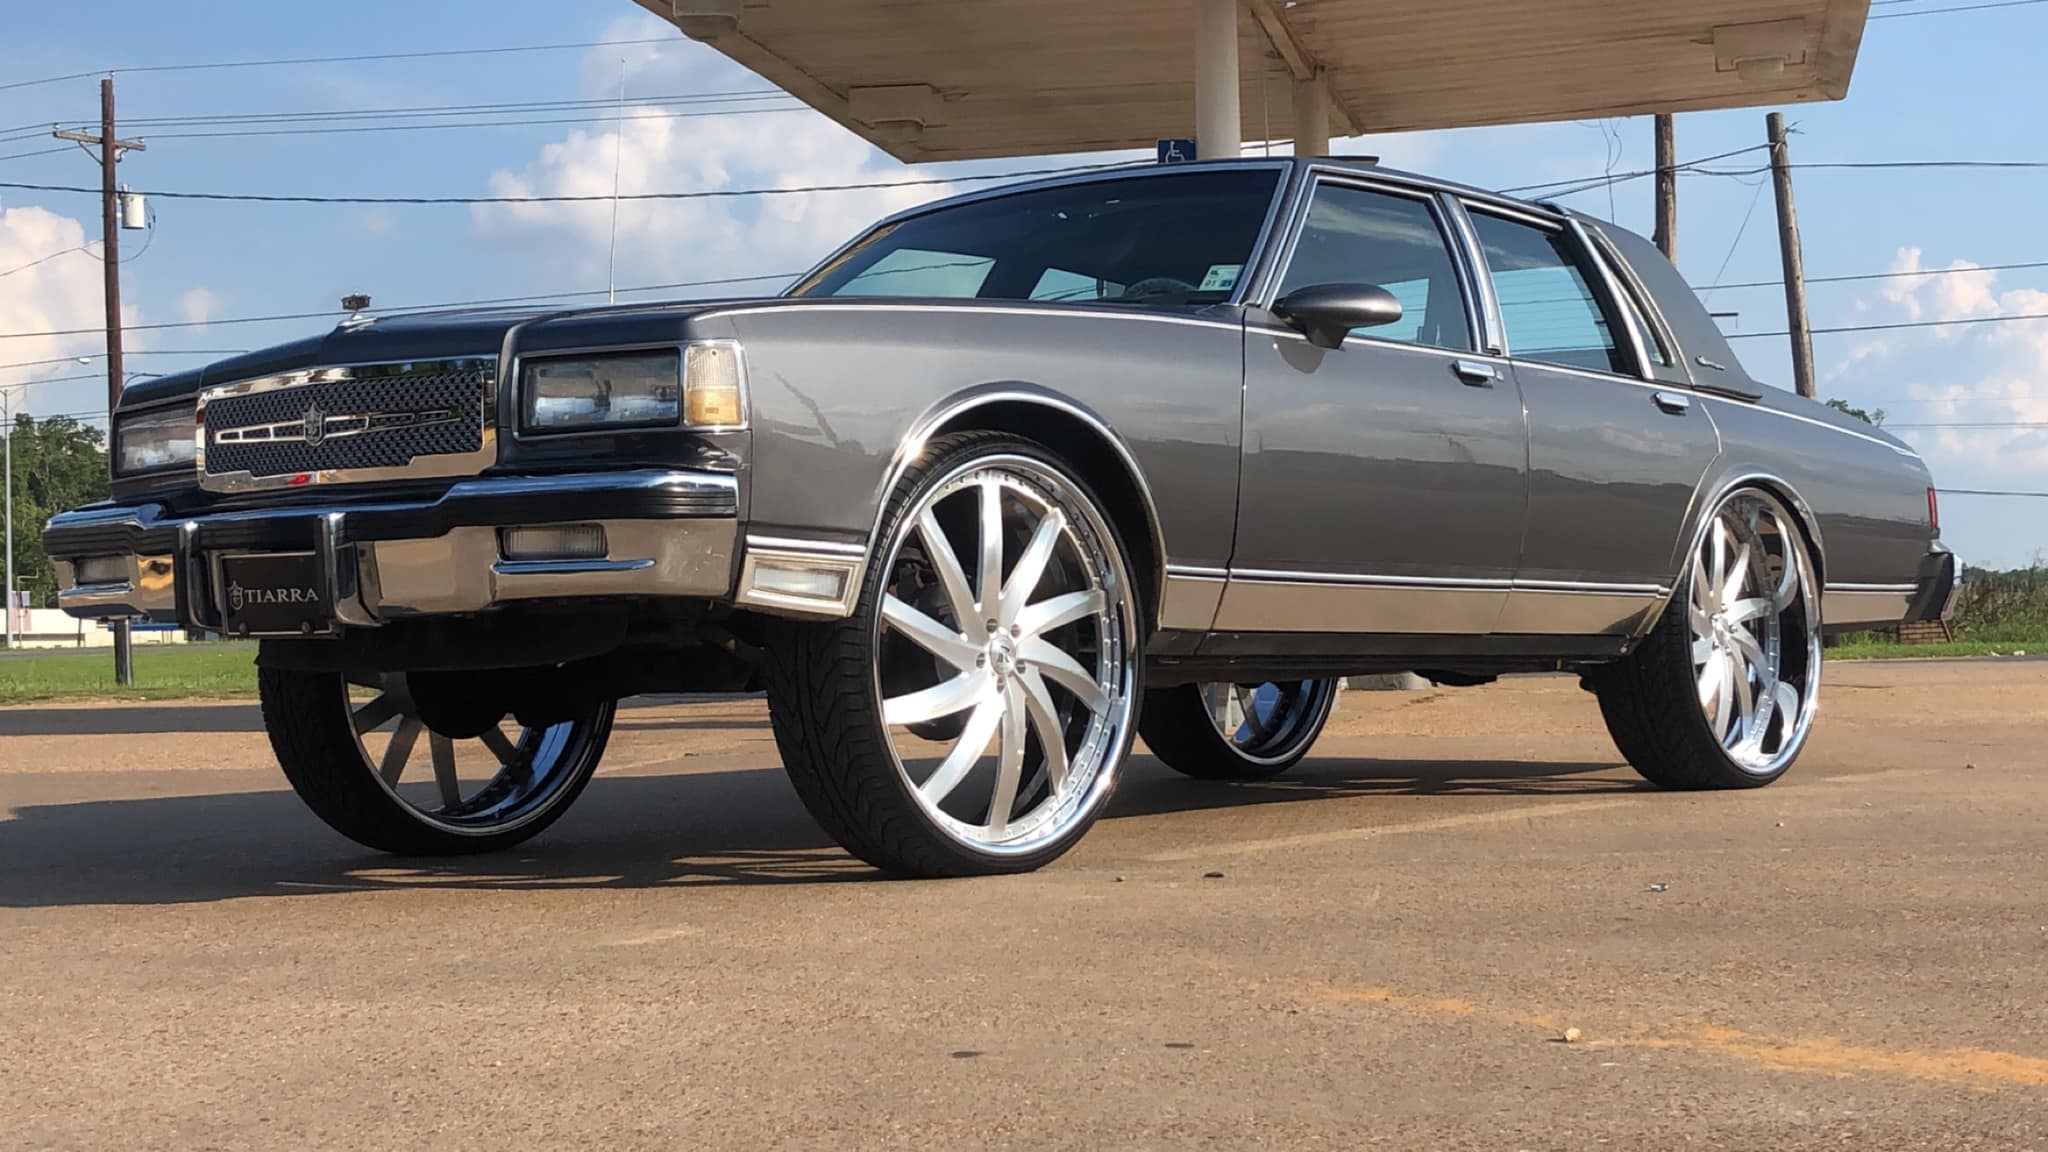 1988 Chevy Caprice LS Brougham on 28" Wheels (gallery and video) - Big...